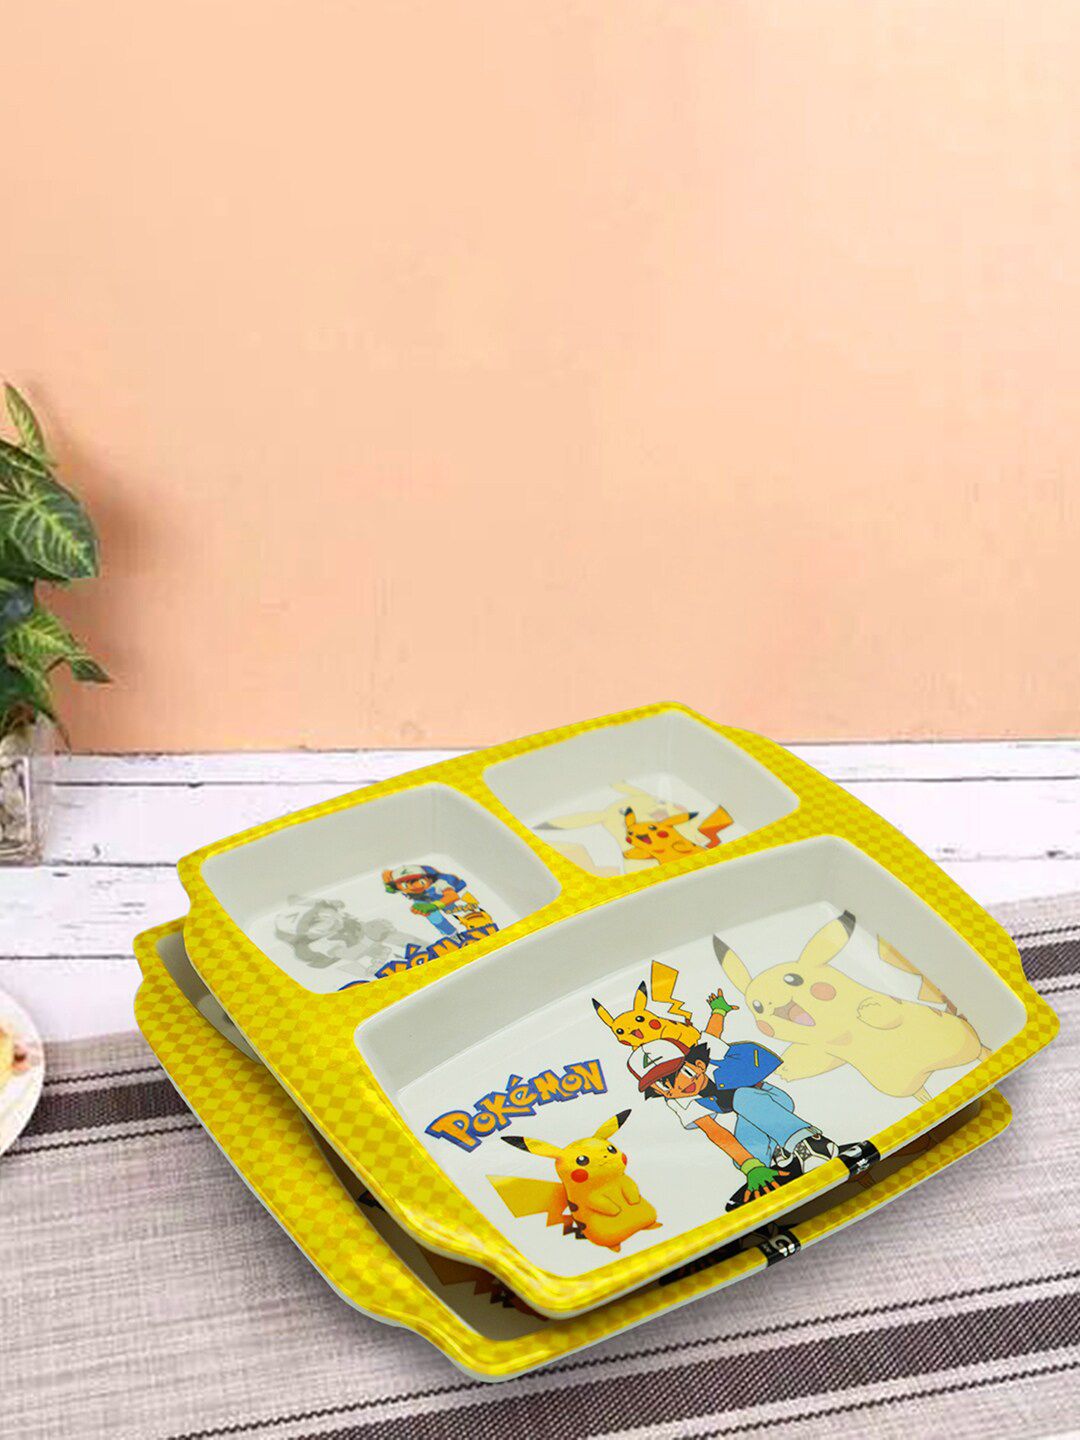 Gallery99 Yellow & White 4 Pieces Printed Melamine Glossy Plates Price in India